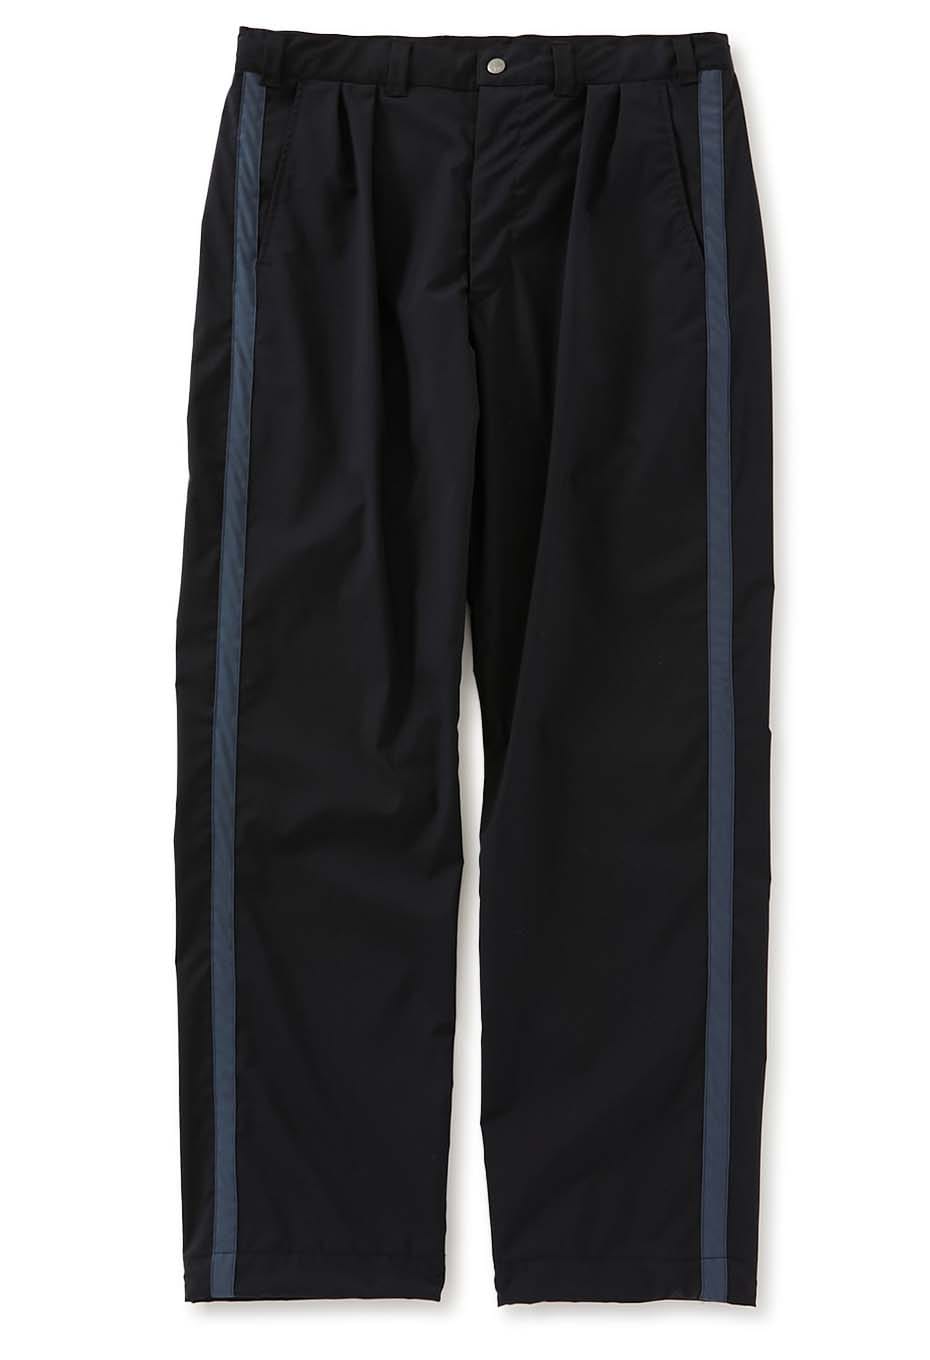 Polyester wool all weather 2 tuck line pants